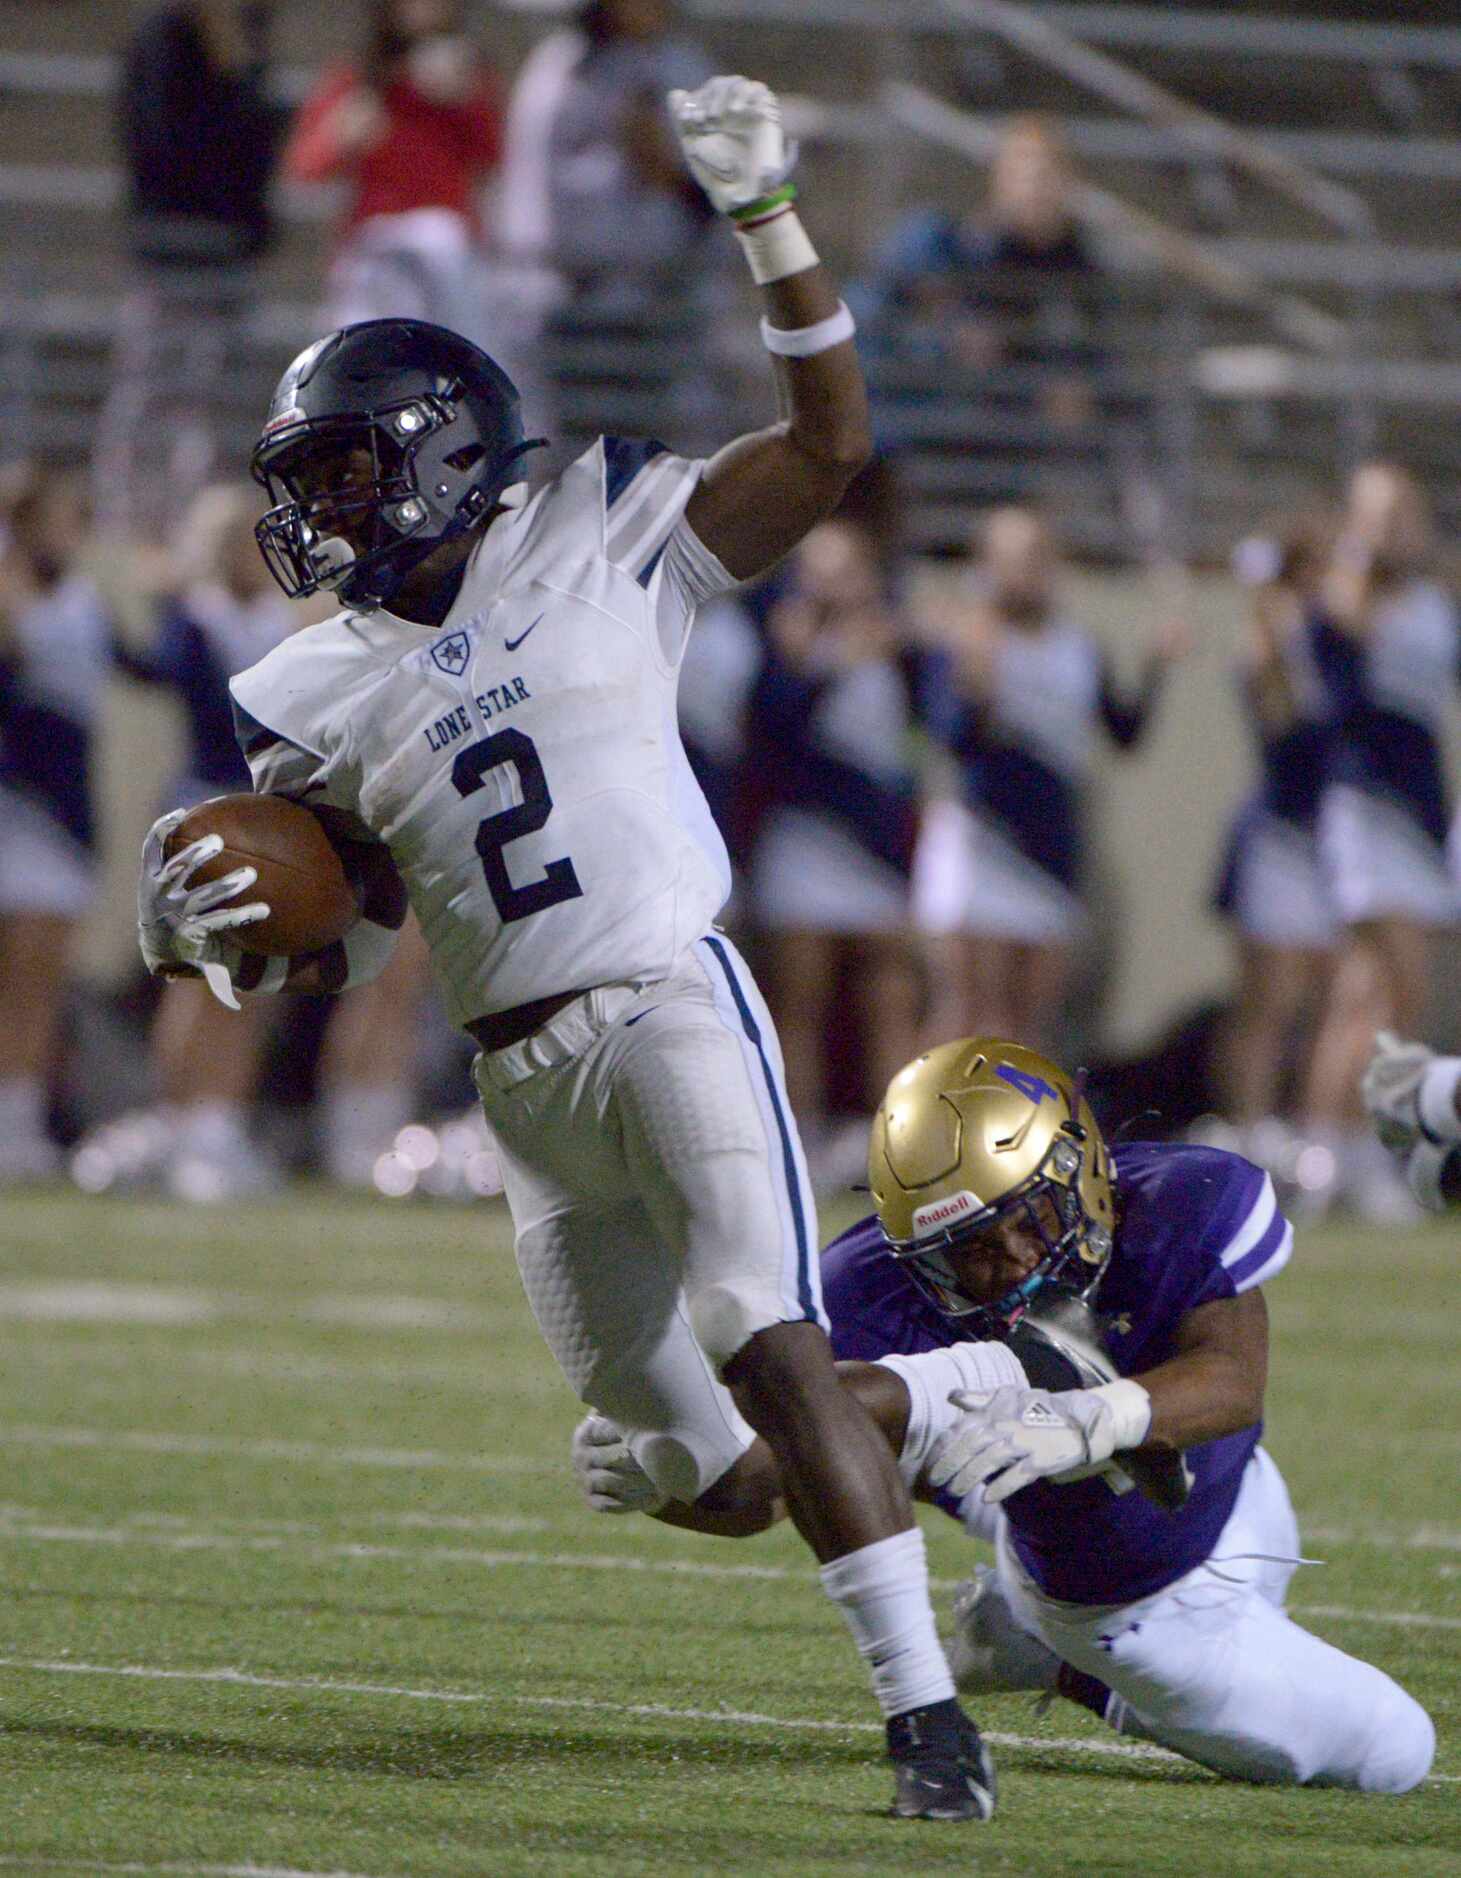 Lone Star’s Ashton Jeanty (2) runs through a tackle attempt by Denton’s Deonte Cates (4) in...